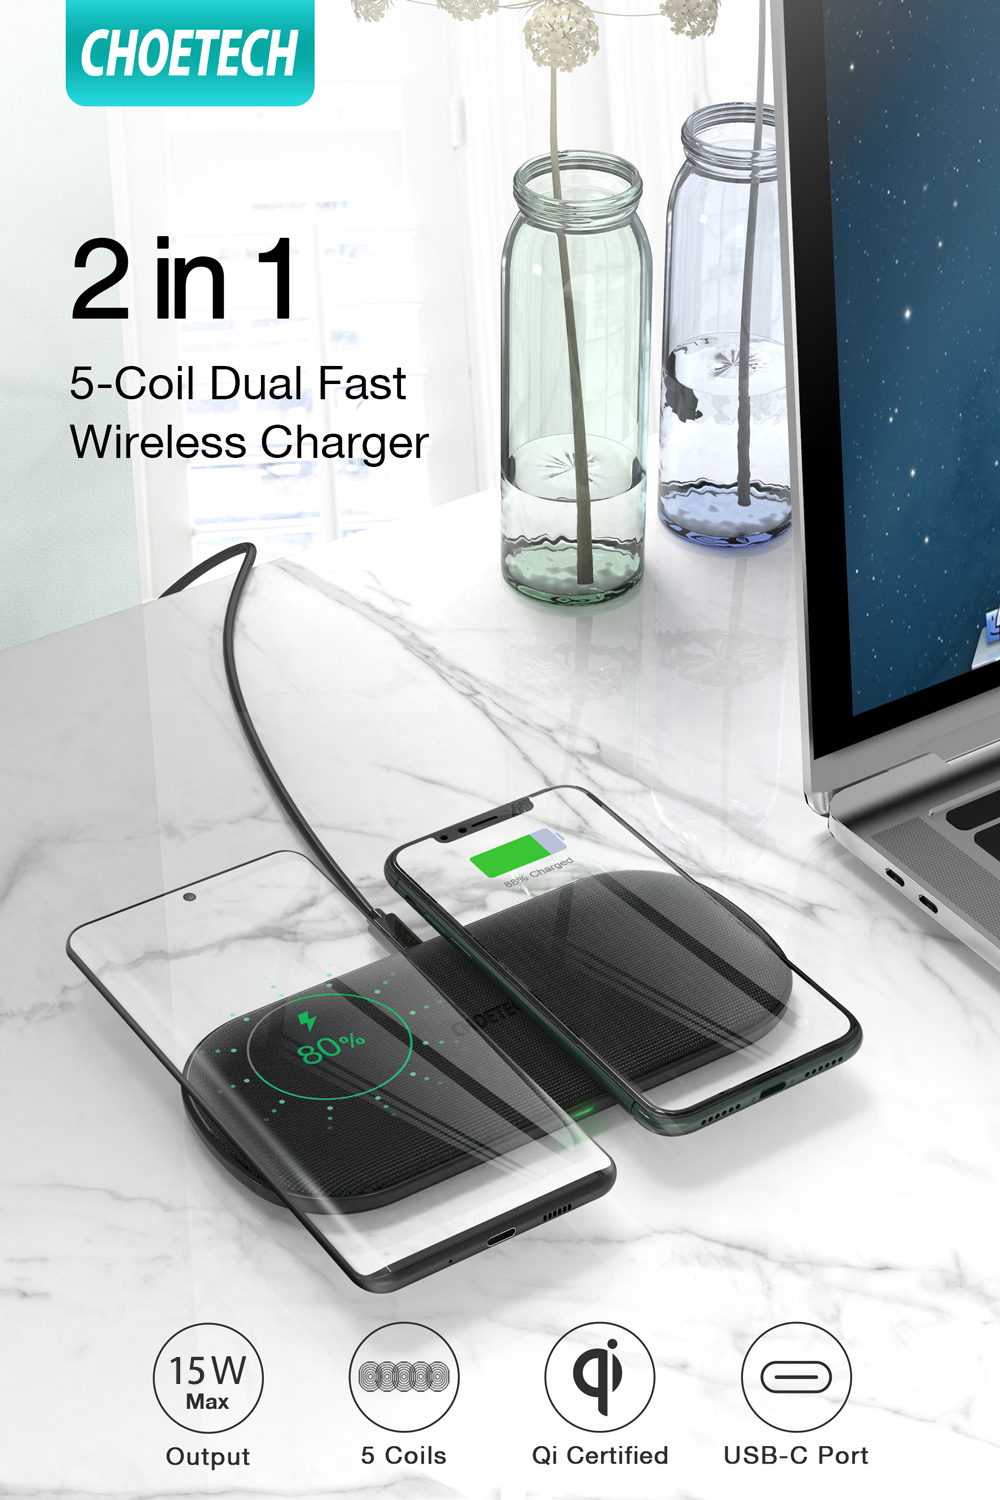 CHOETECH-10W-Five-coil-Wireless-Charger-Fast-Charging-For-iPhone-8-Plus-X-XS-11-Pro-for-Samsung-S20-1686570-1